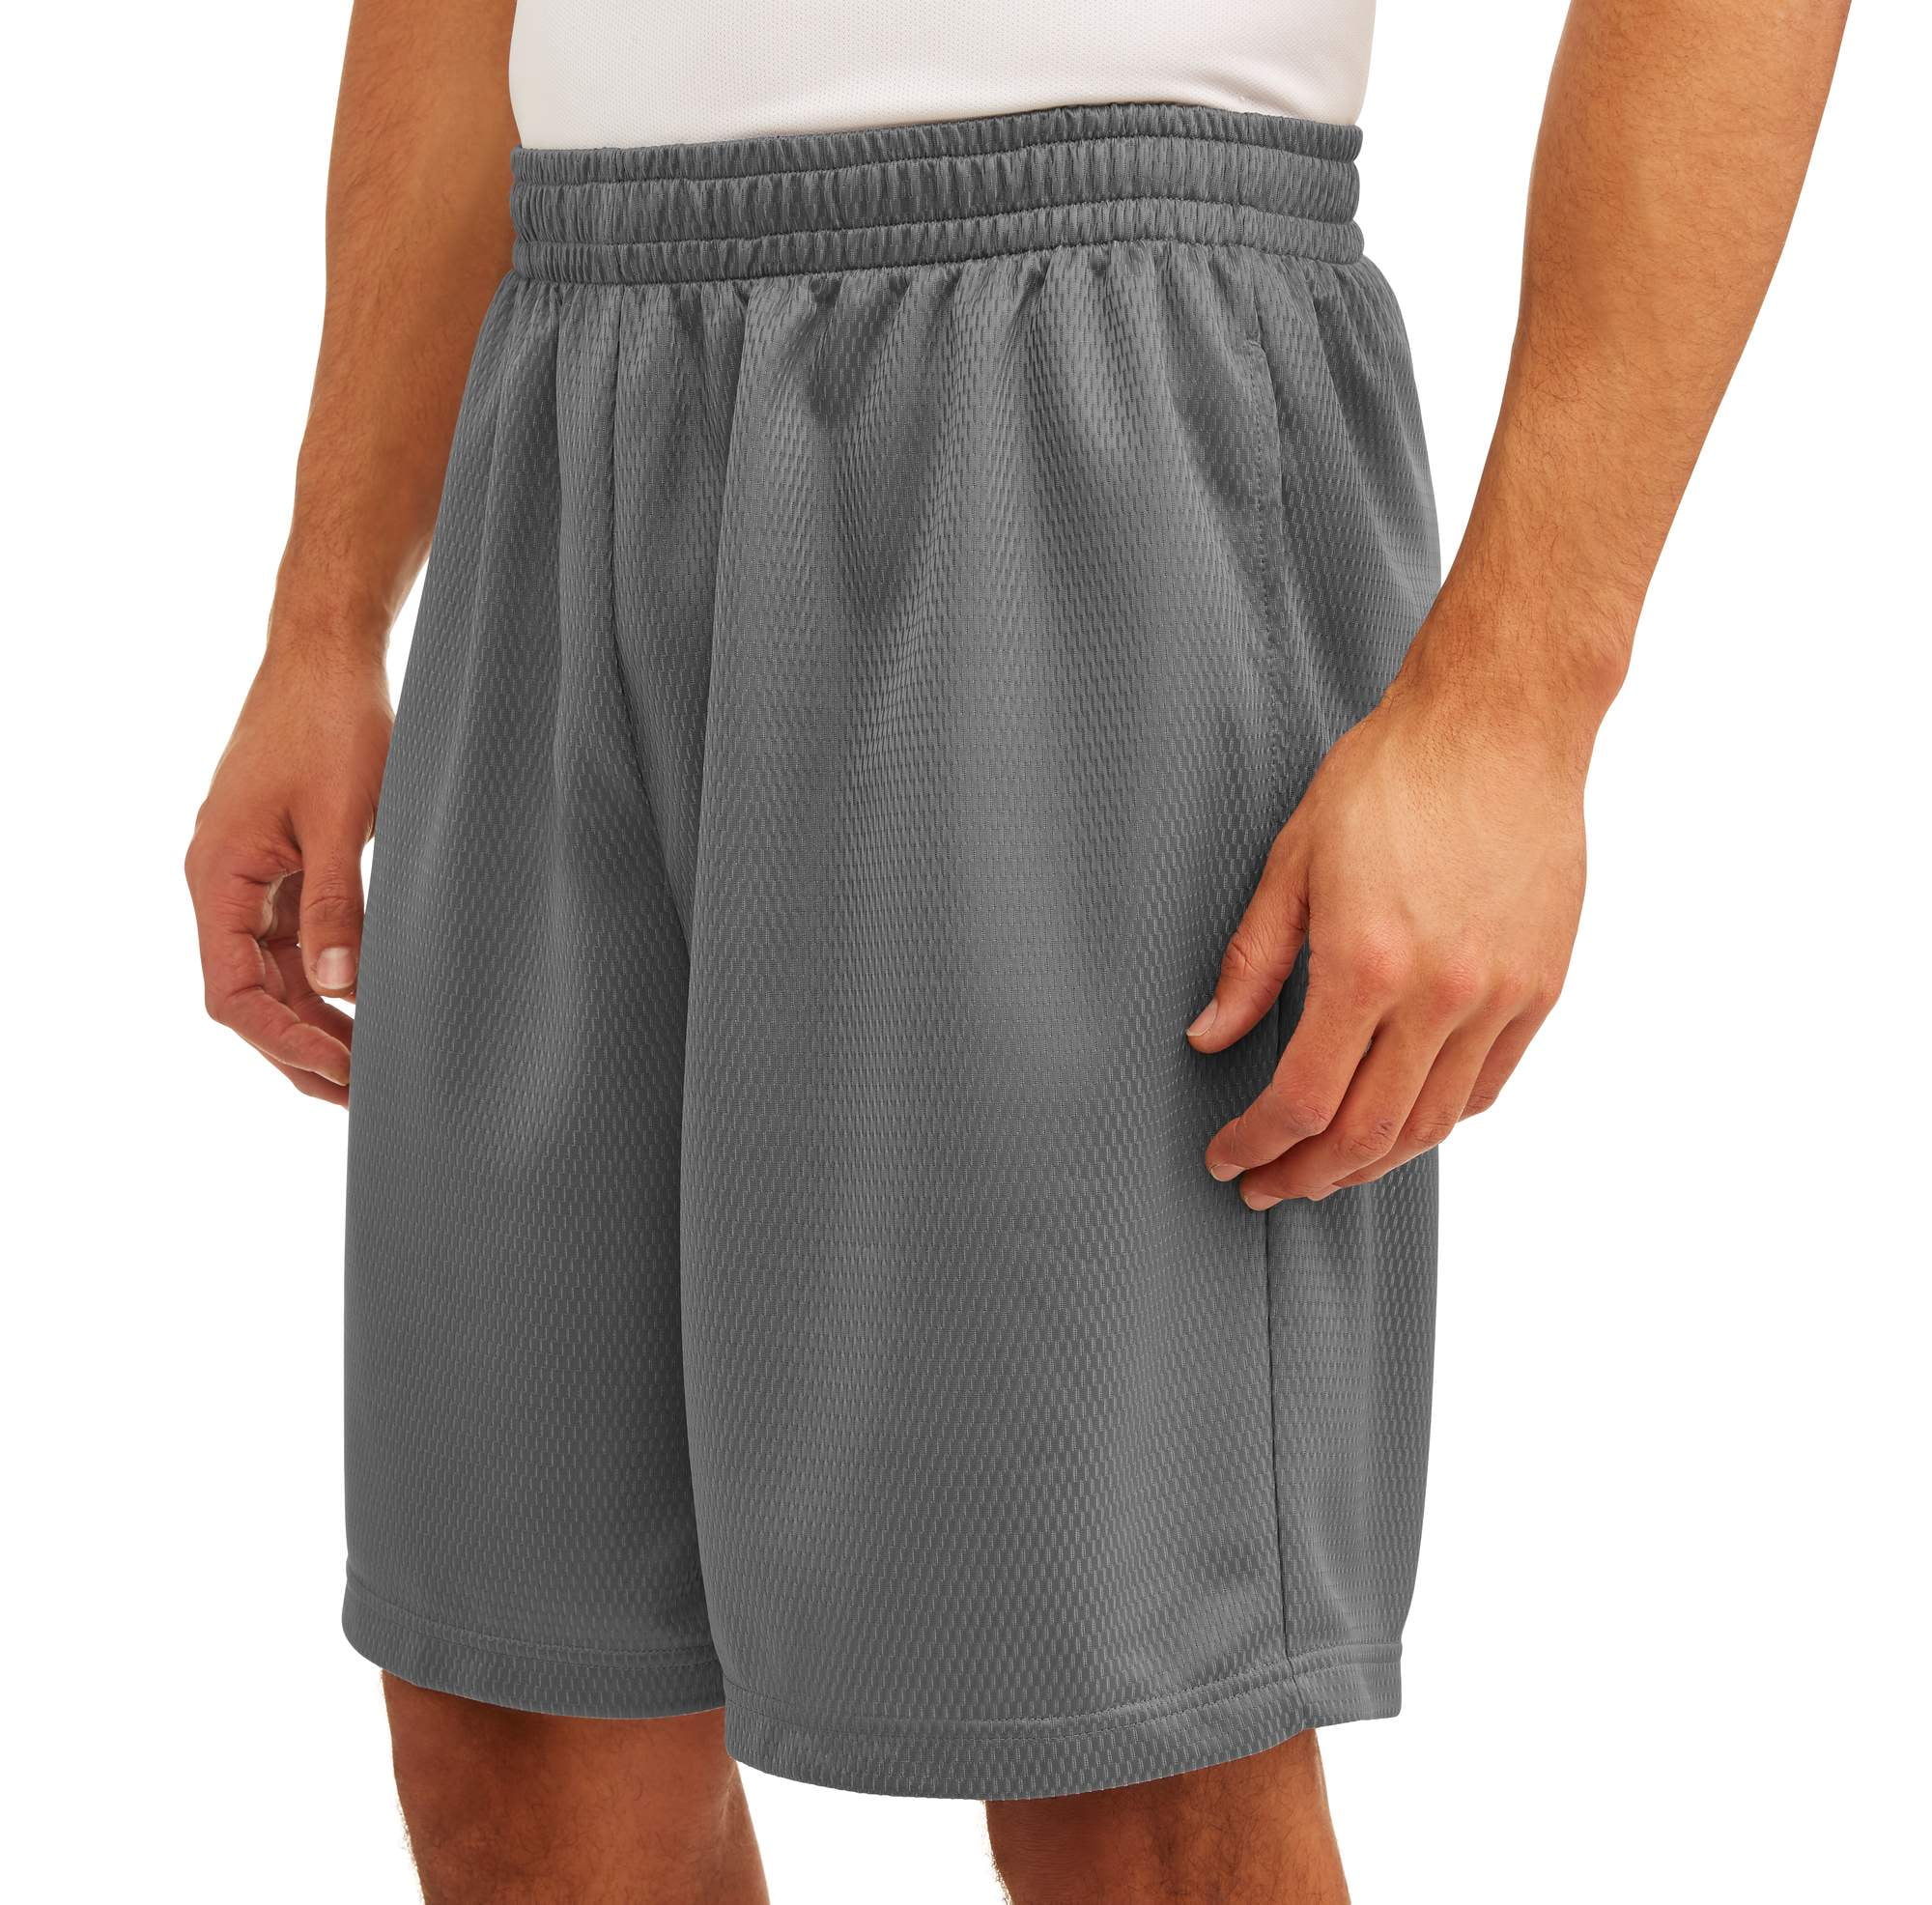 Mens Athletic Perforated Shorts With Band